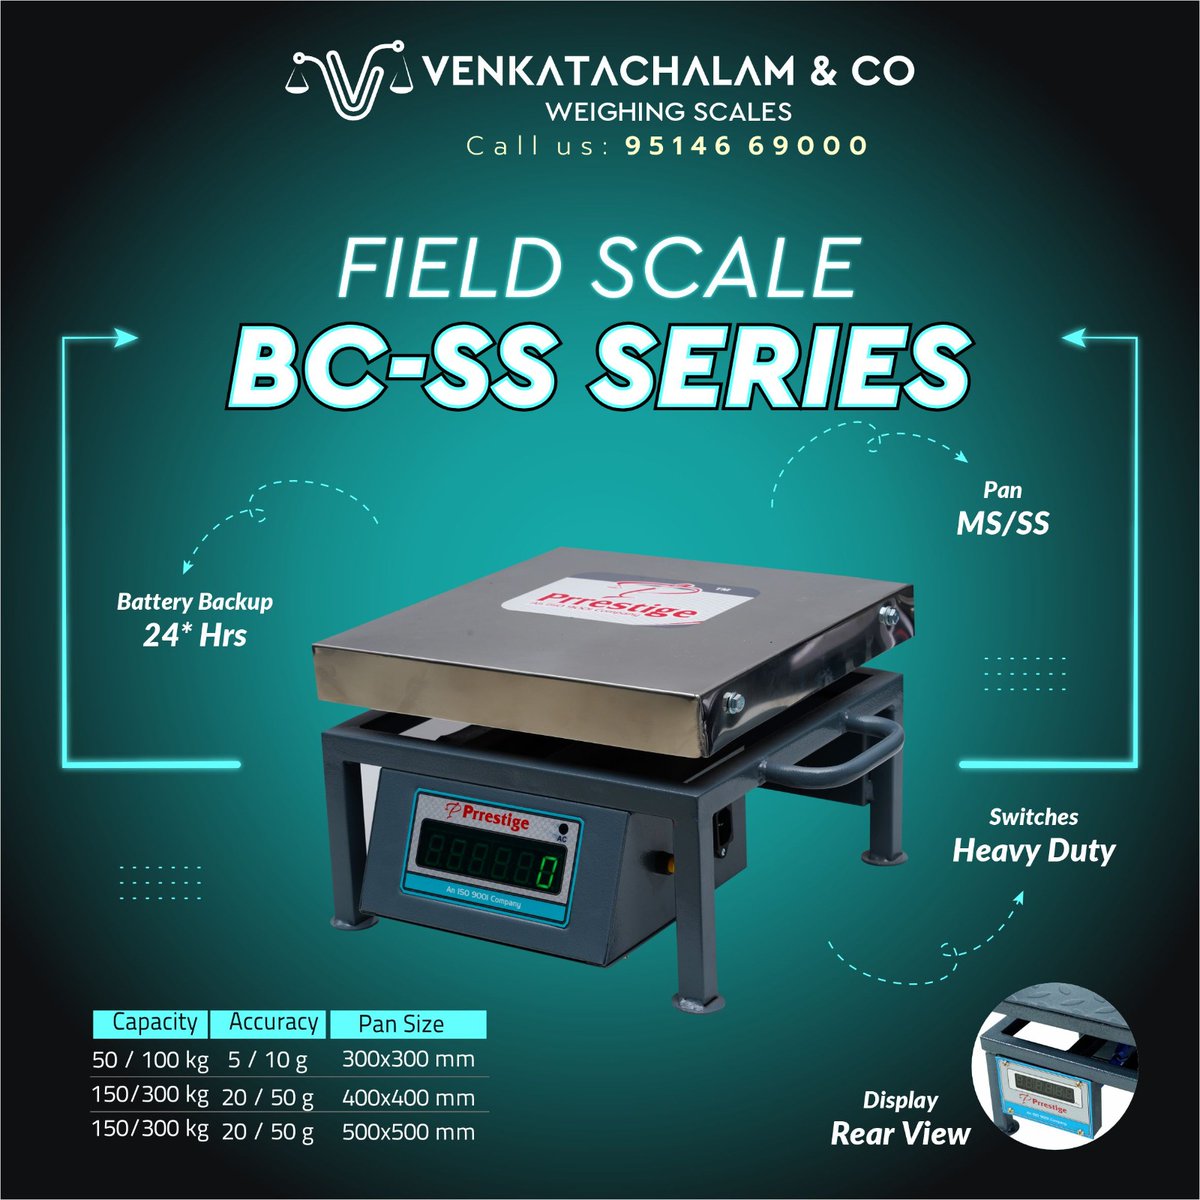 BC-SS series -  FIELD SCALE

Green display, Advance software technology with extra display option. Available in 100kgs & 300kgs weight capacity.  Perfect for #industrialuse #vegetablemarket
#venkatachalam #prrestigescale #venkatachalamandCo #coimbatore #digitalscales #FieldScales